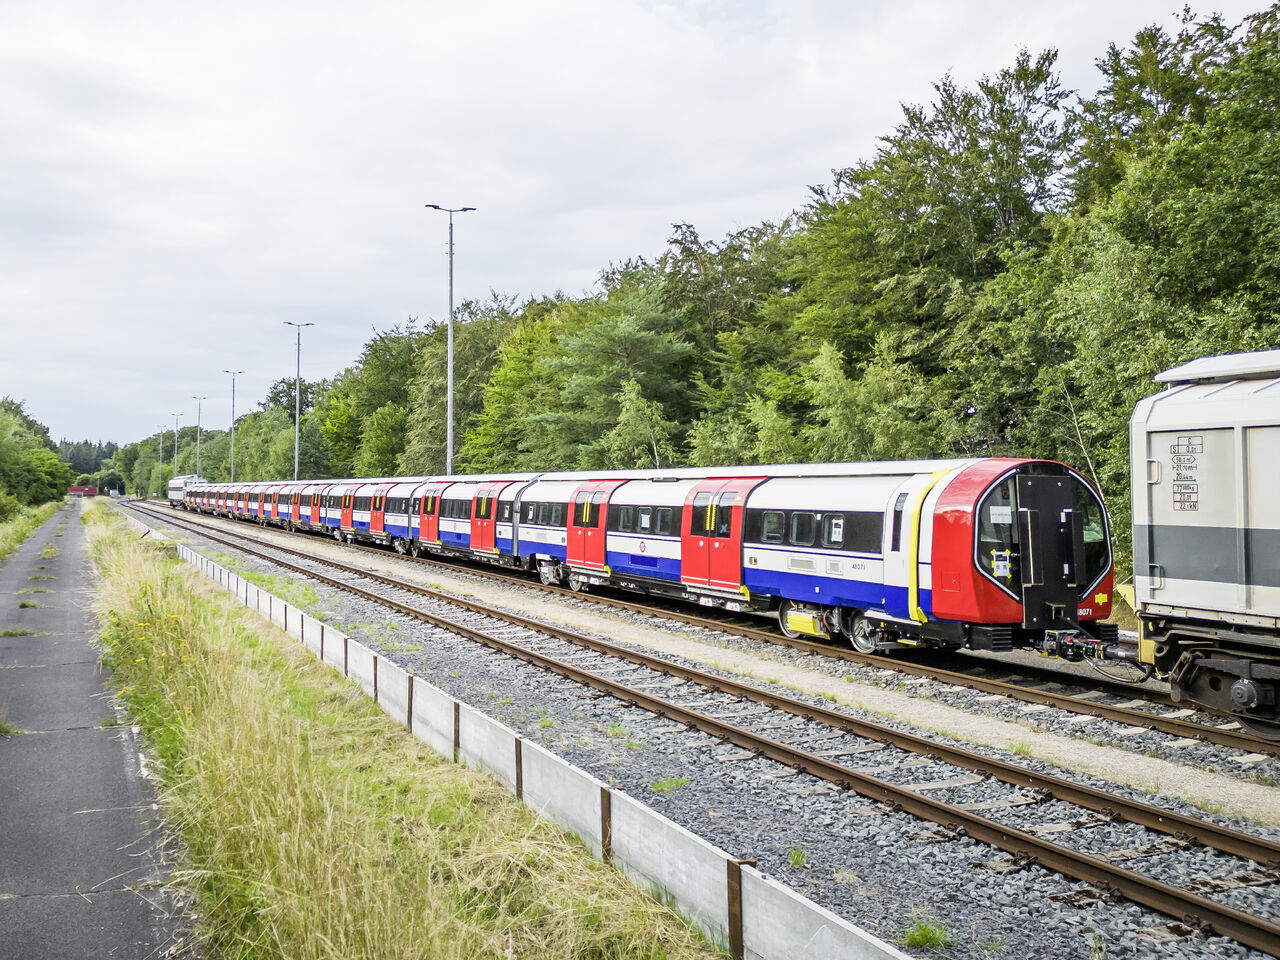 A first look at the new Piccadilly Line trains